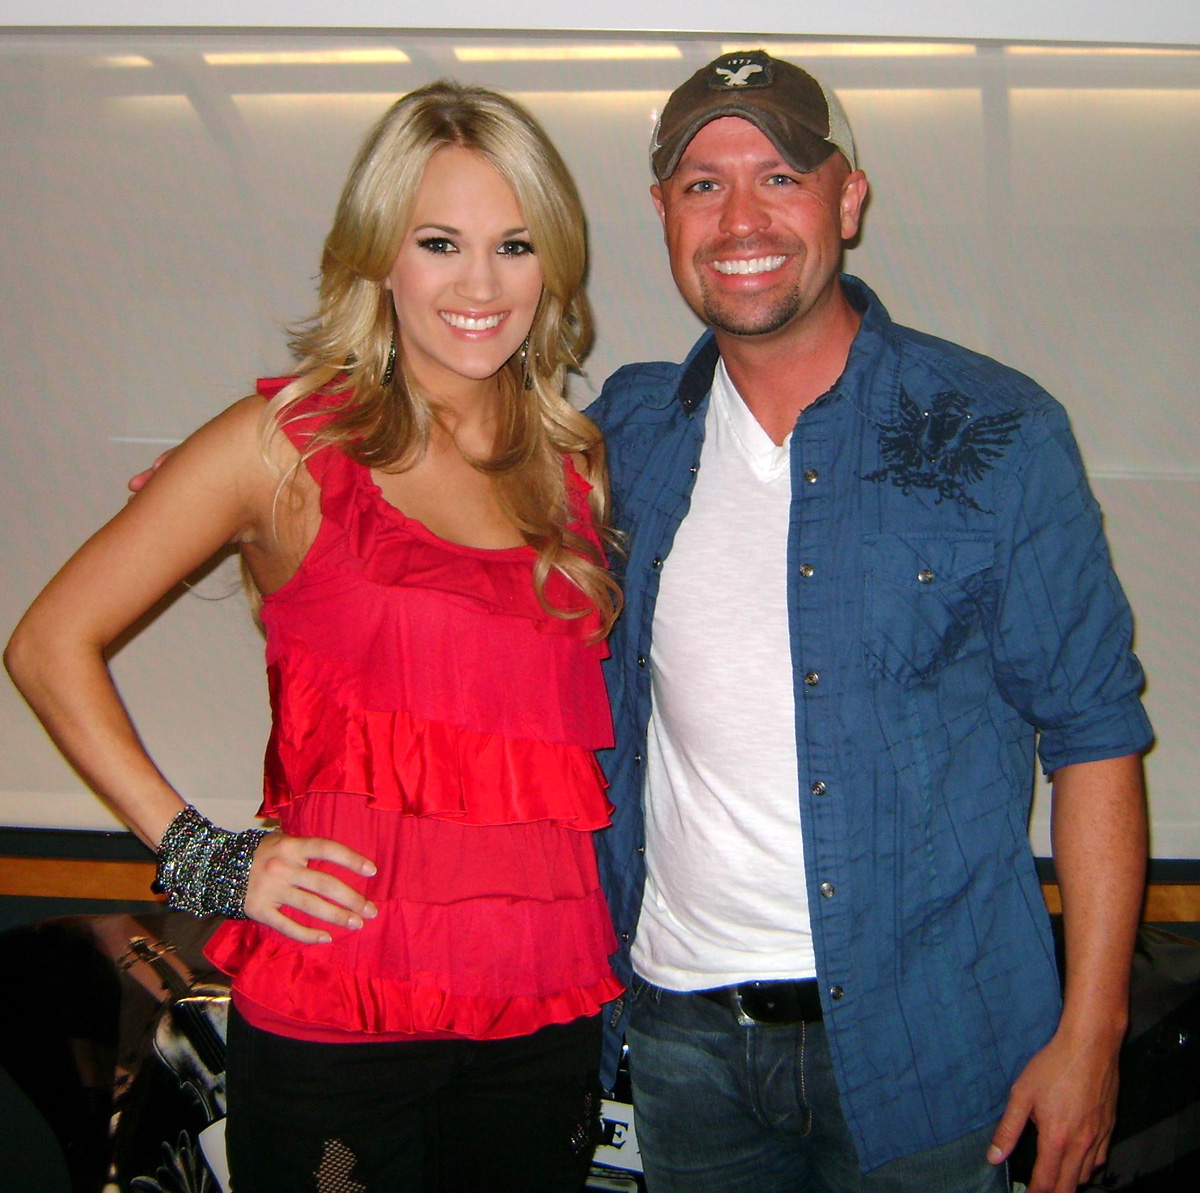 Carrie Underwood stops by CMT Radio Live